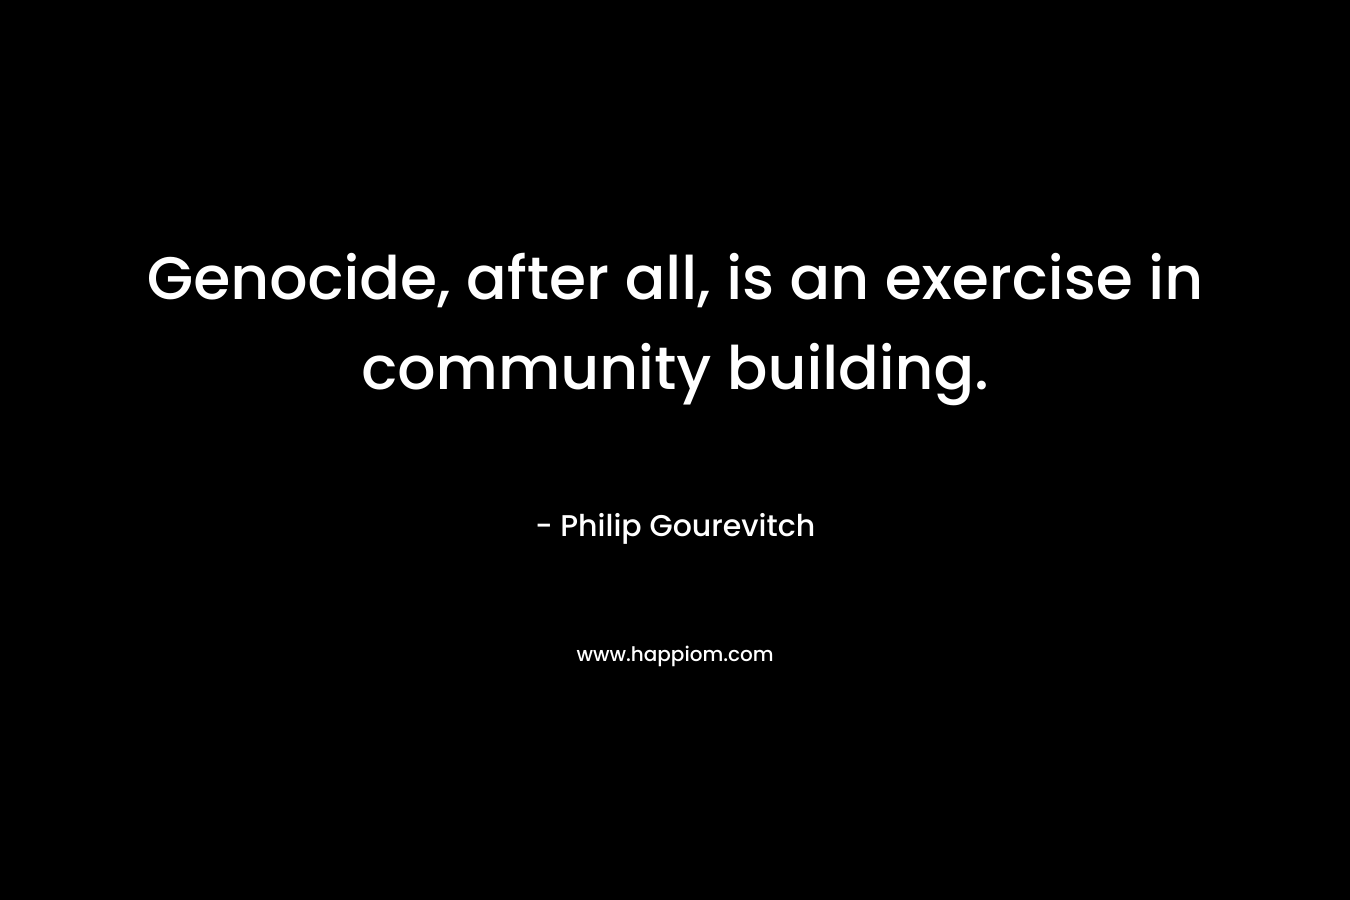 Genocide, after all, is an exercise in community building. – Philip Gourevitch